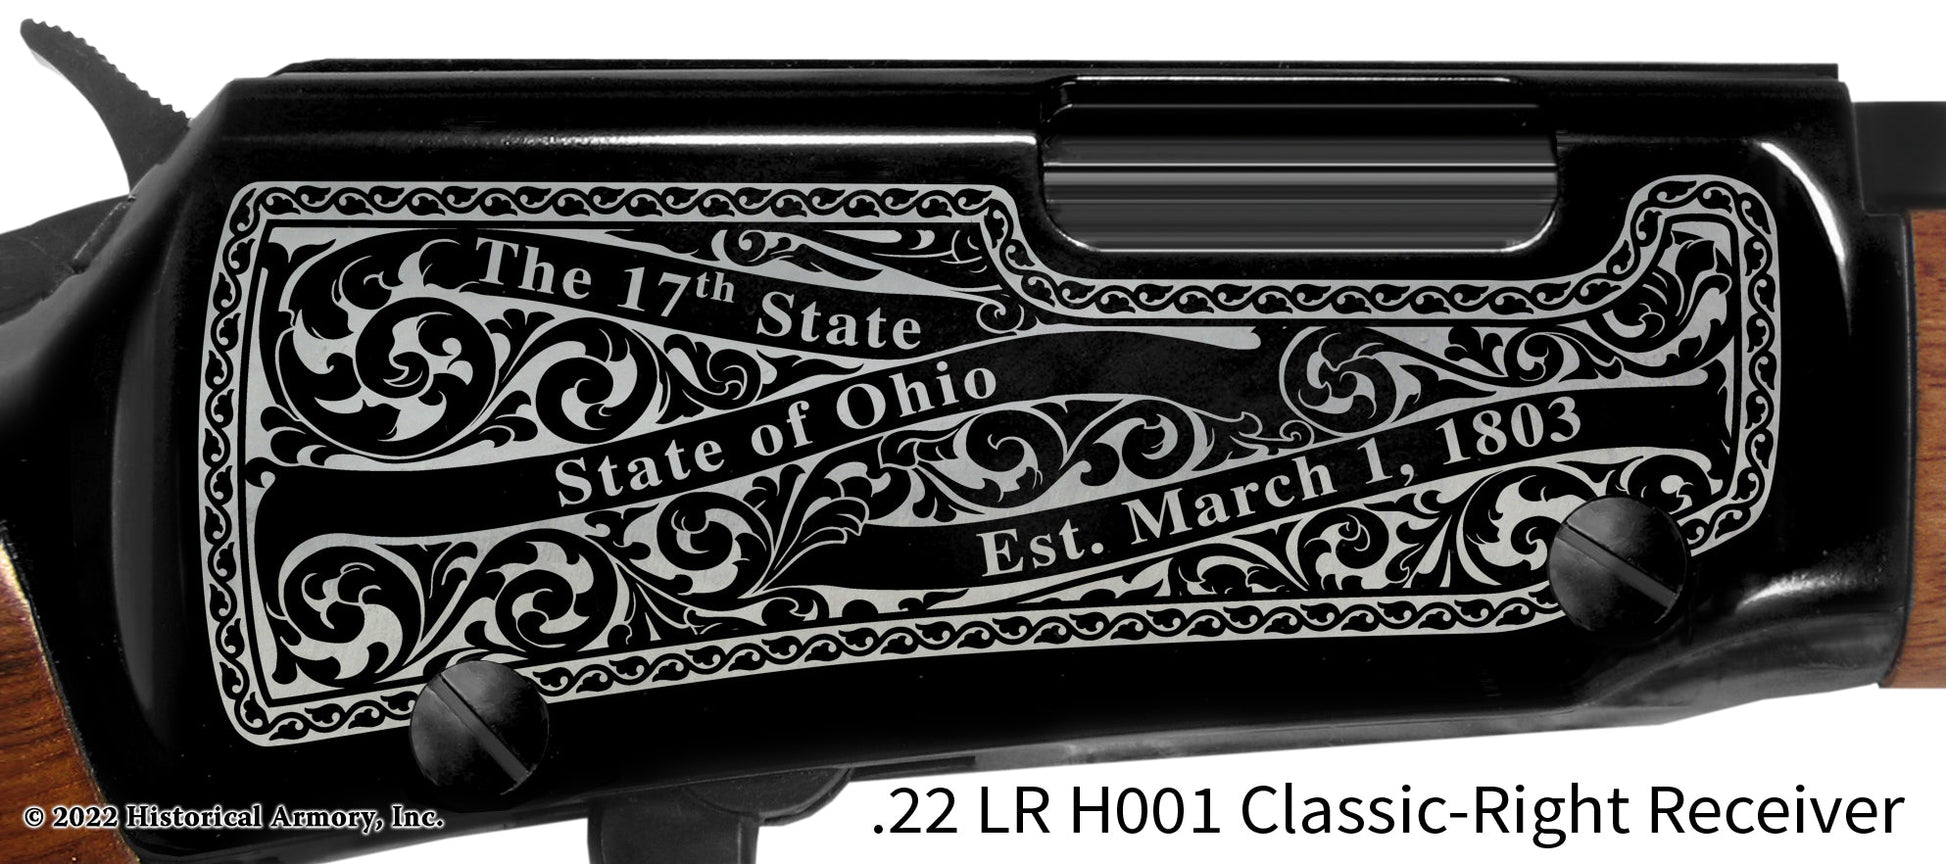 Tuscarawas County Ohio Engraved Henry H001 Rifle